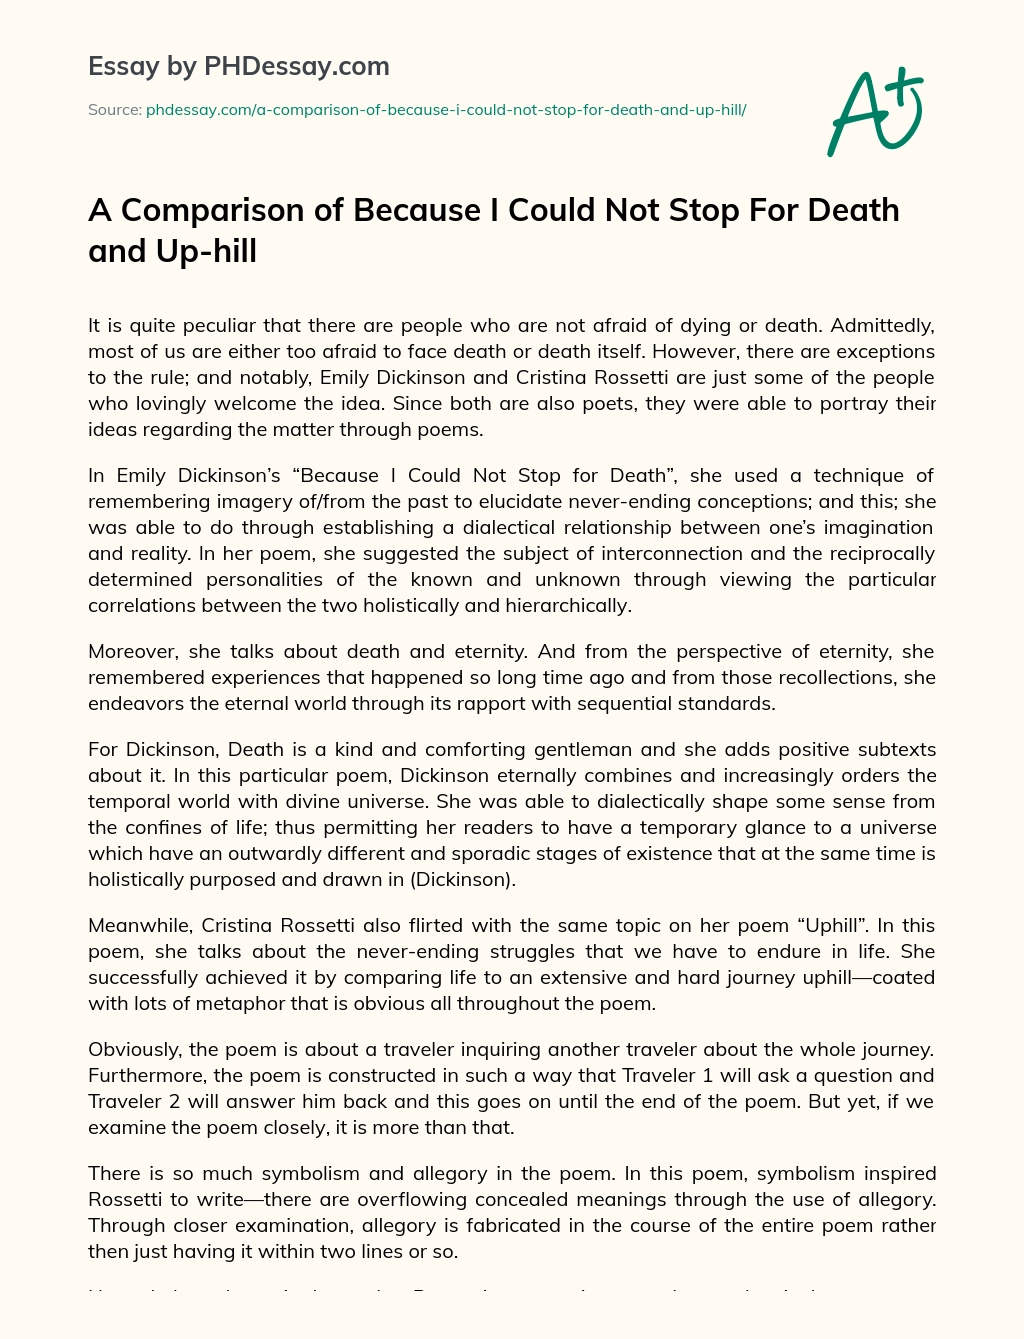 A Comparison of Because I Could Not Stop For Death and Up-hill essay